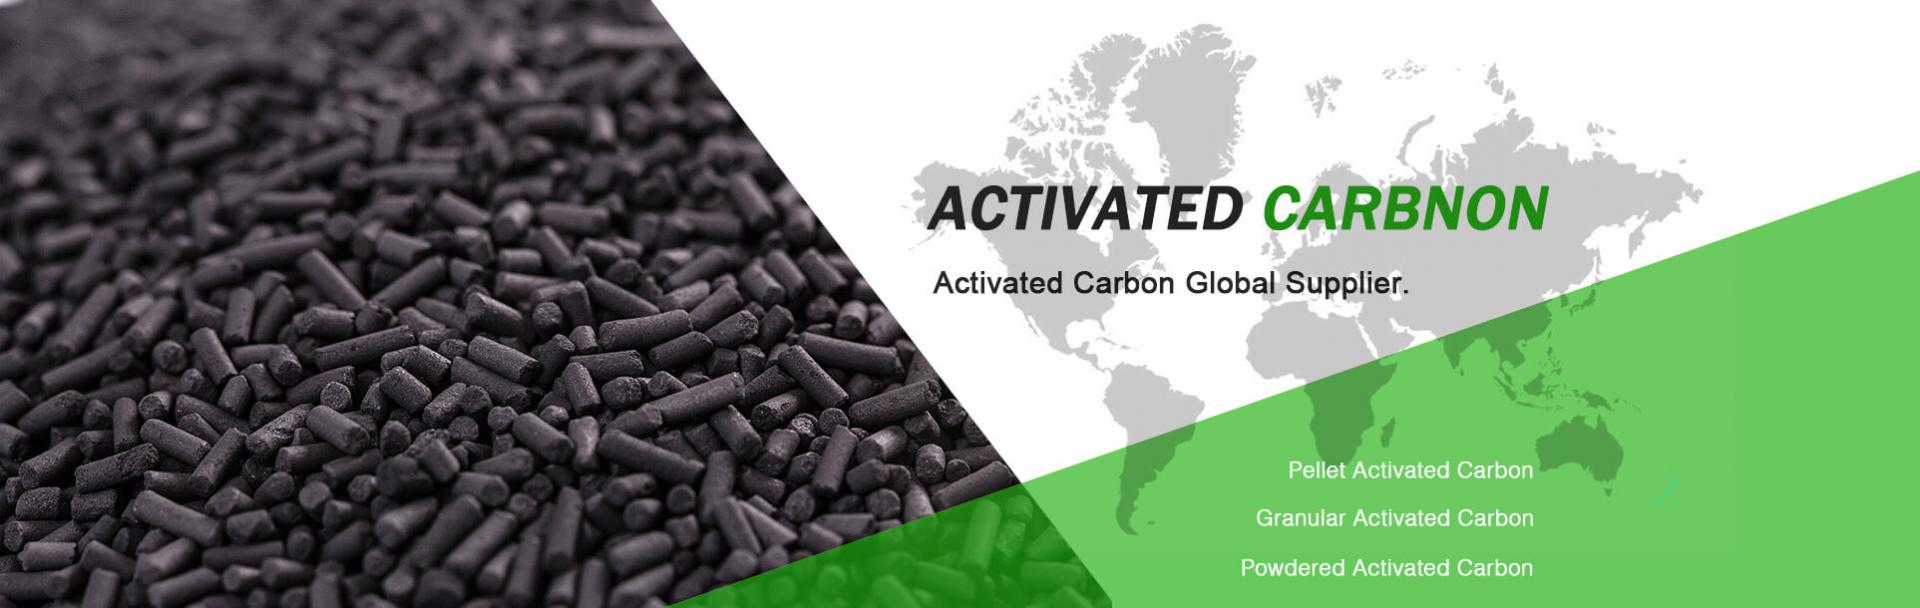 Zhulin Carbon: Activated Carbon Manufacturers and Suppliers from China